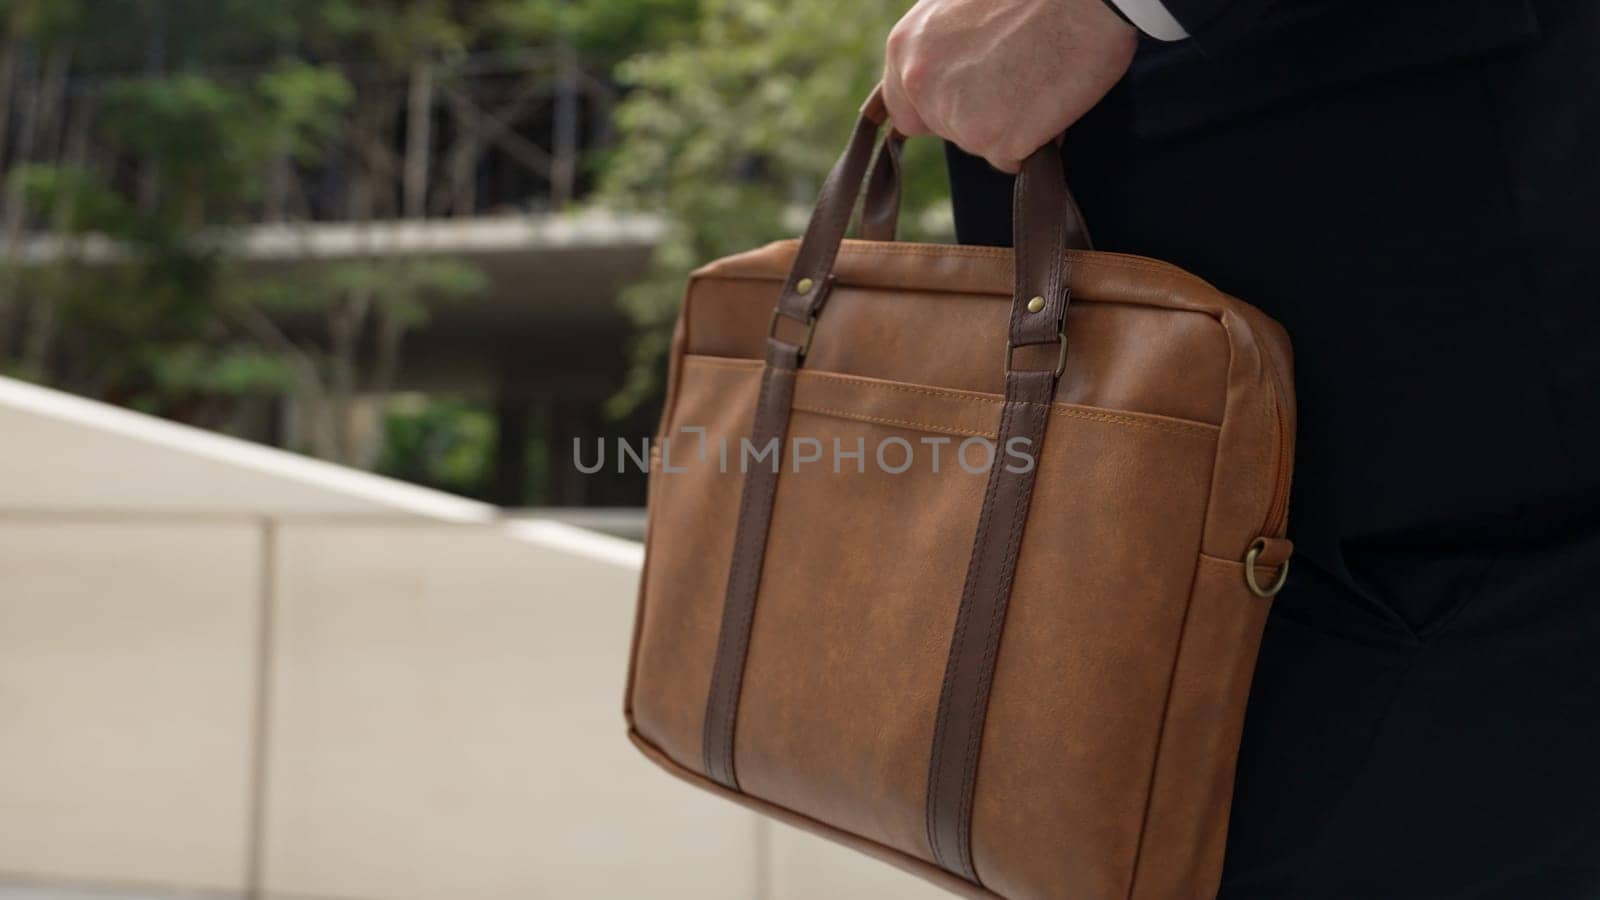 Close up of suitcase was held by profession businessman while project manager walking up stairs or step to new position at green eco city. Happy project manager using travel bag. Focus on bag. Urbane.